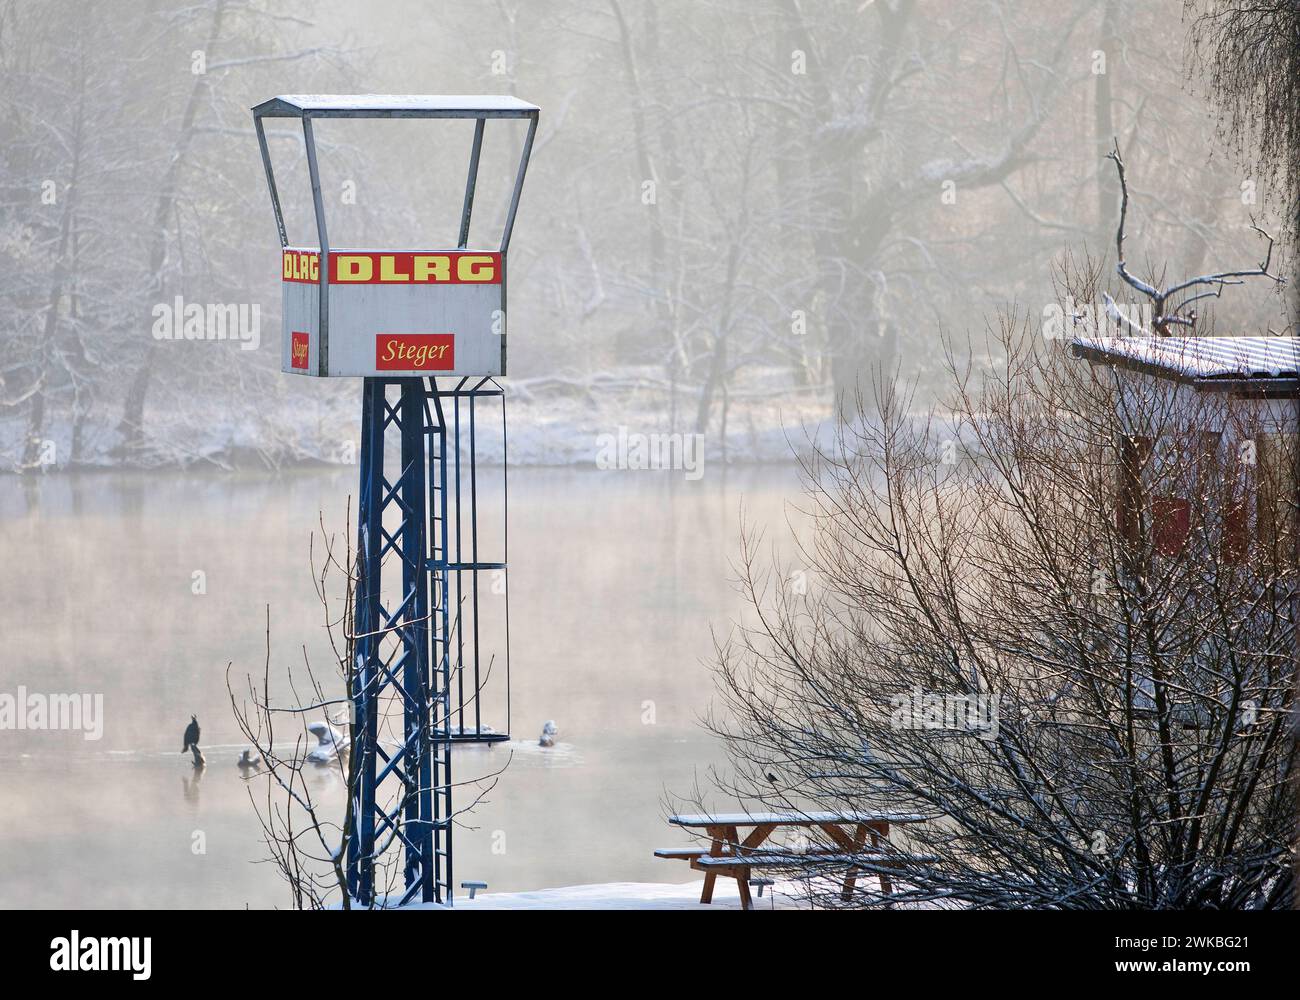 DLRG tower at the Steger campsite in winter with snow and fog over the Ruhr, Germany, North Rhine-Westphalia, Ruhr Area, Witten Stock Photo